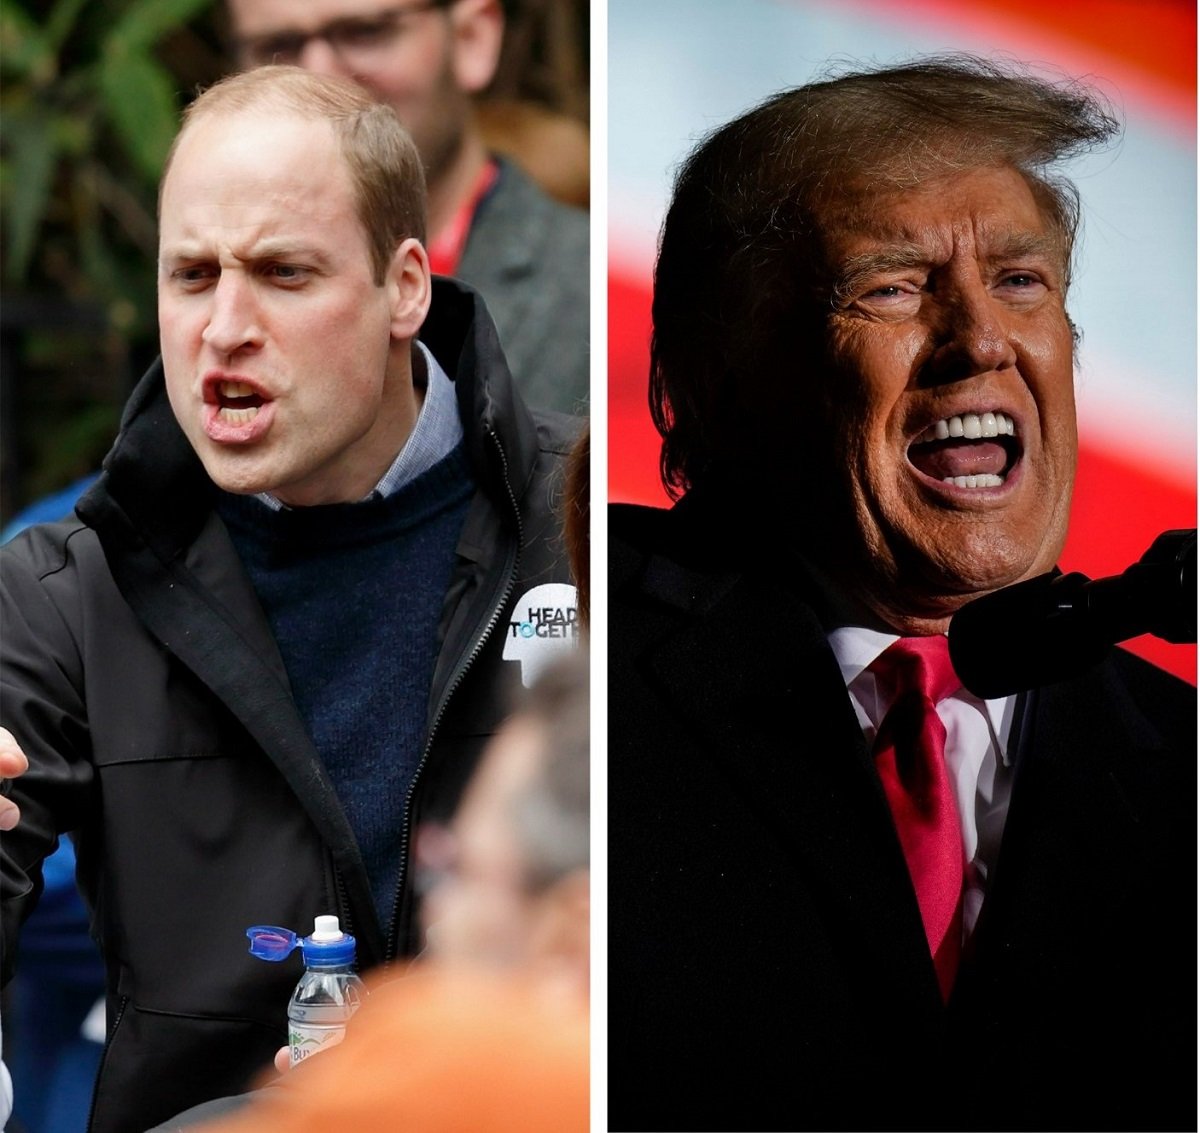 Prince William Was Furious Over Donald Trump's Comments About Kate Middleton Sunbathing Topless and He the Royal Author Says